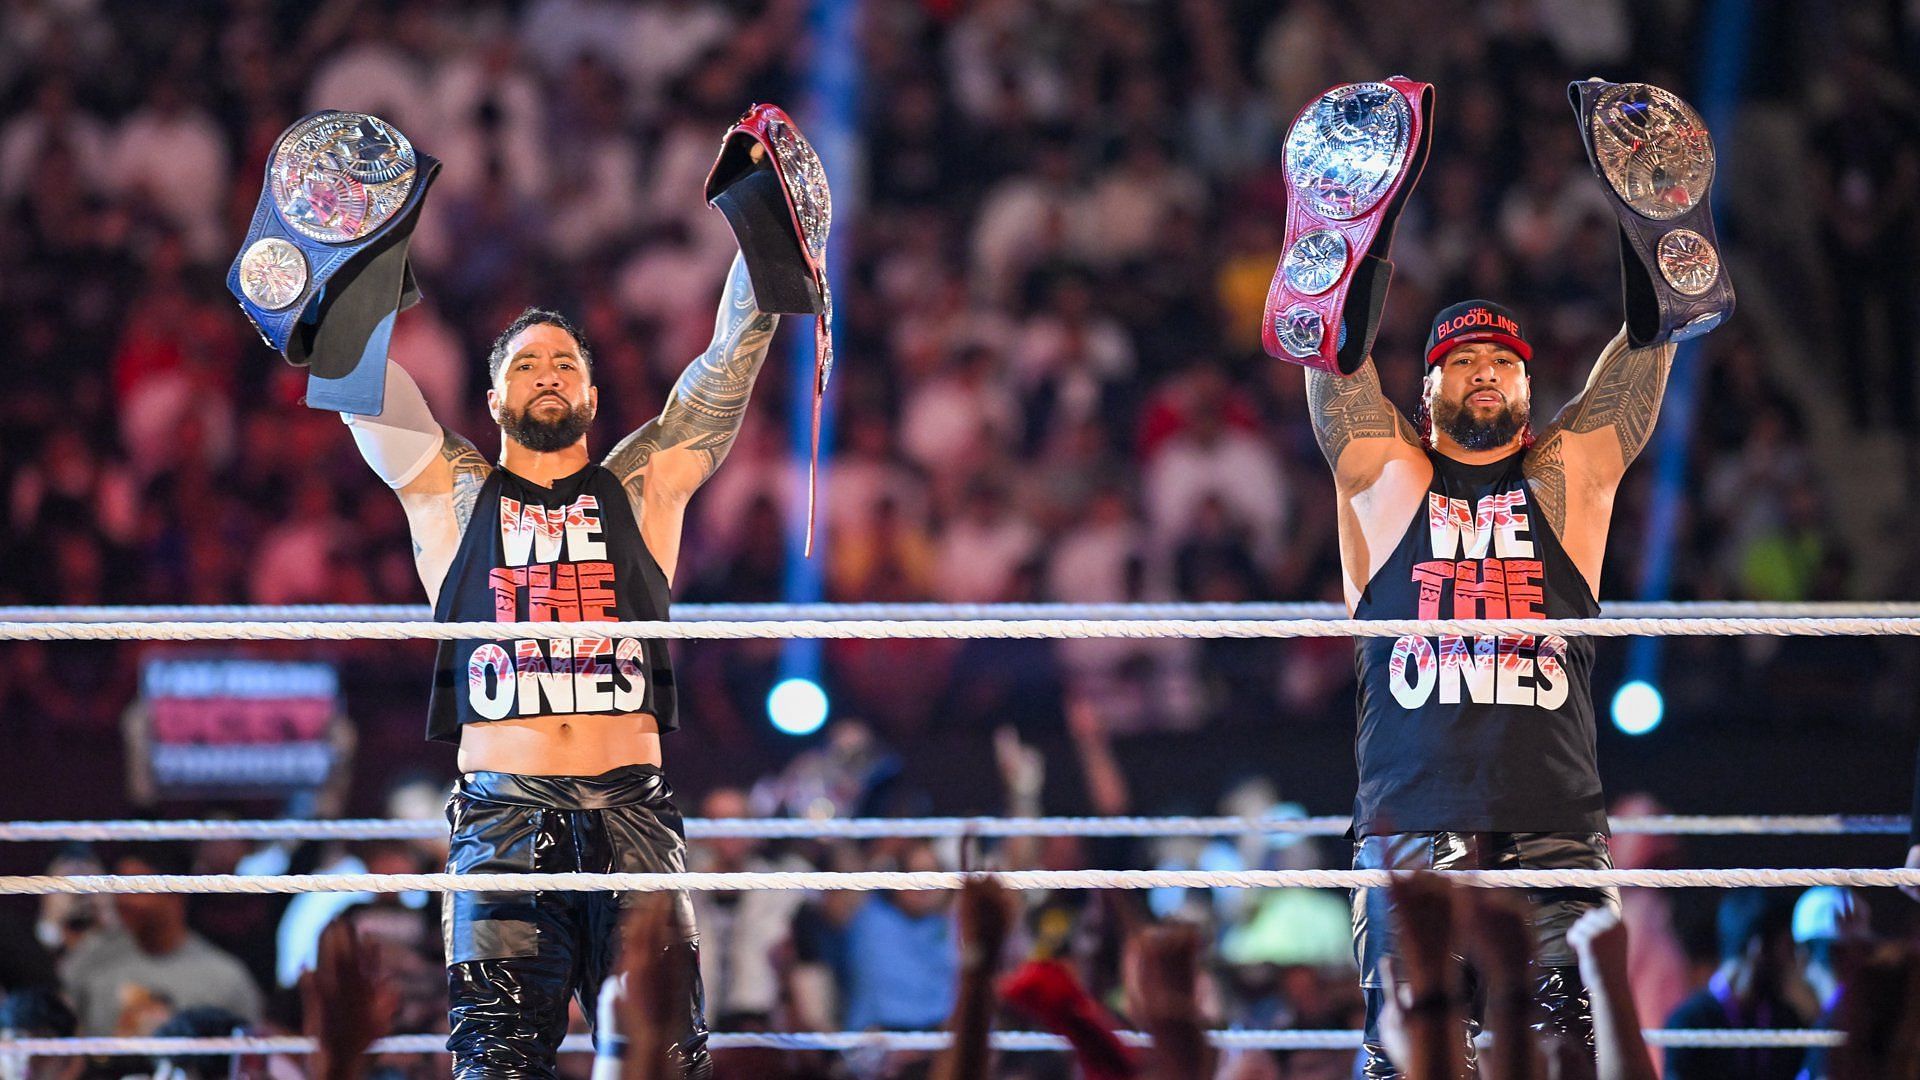 The Usos at Crown Jewel